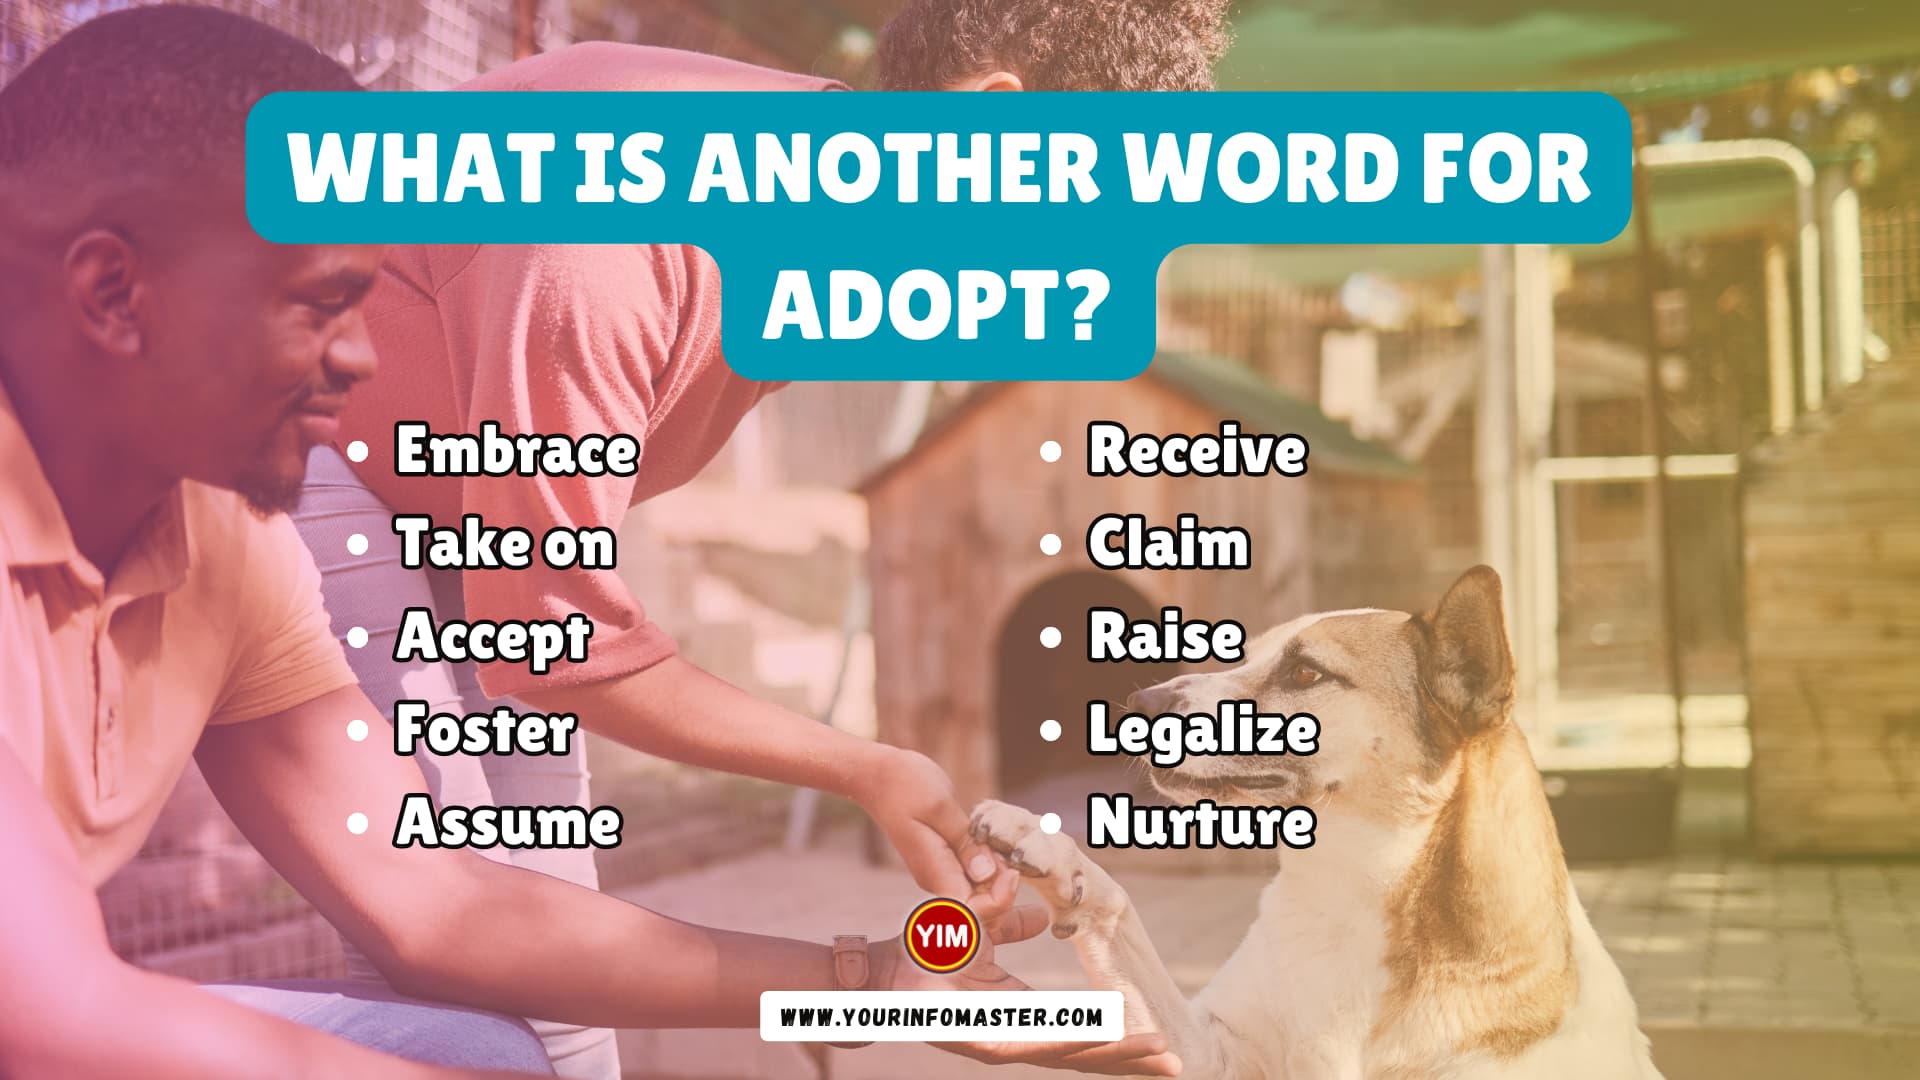 What is another word for Adopt